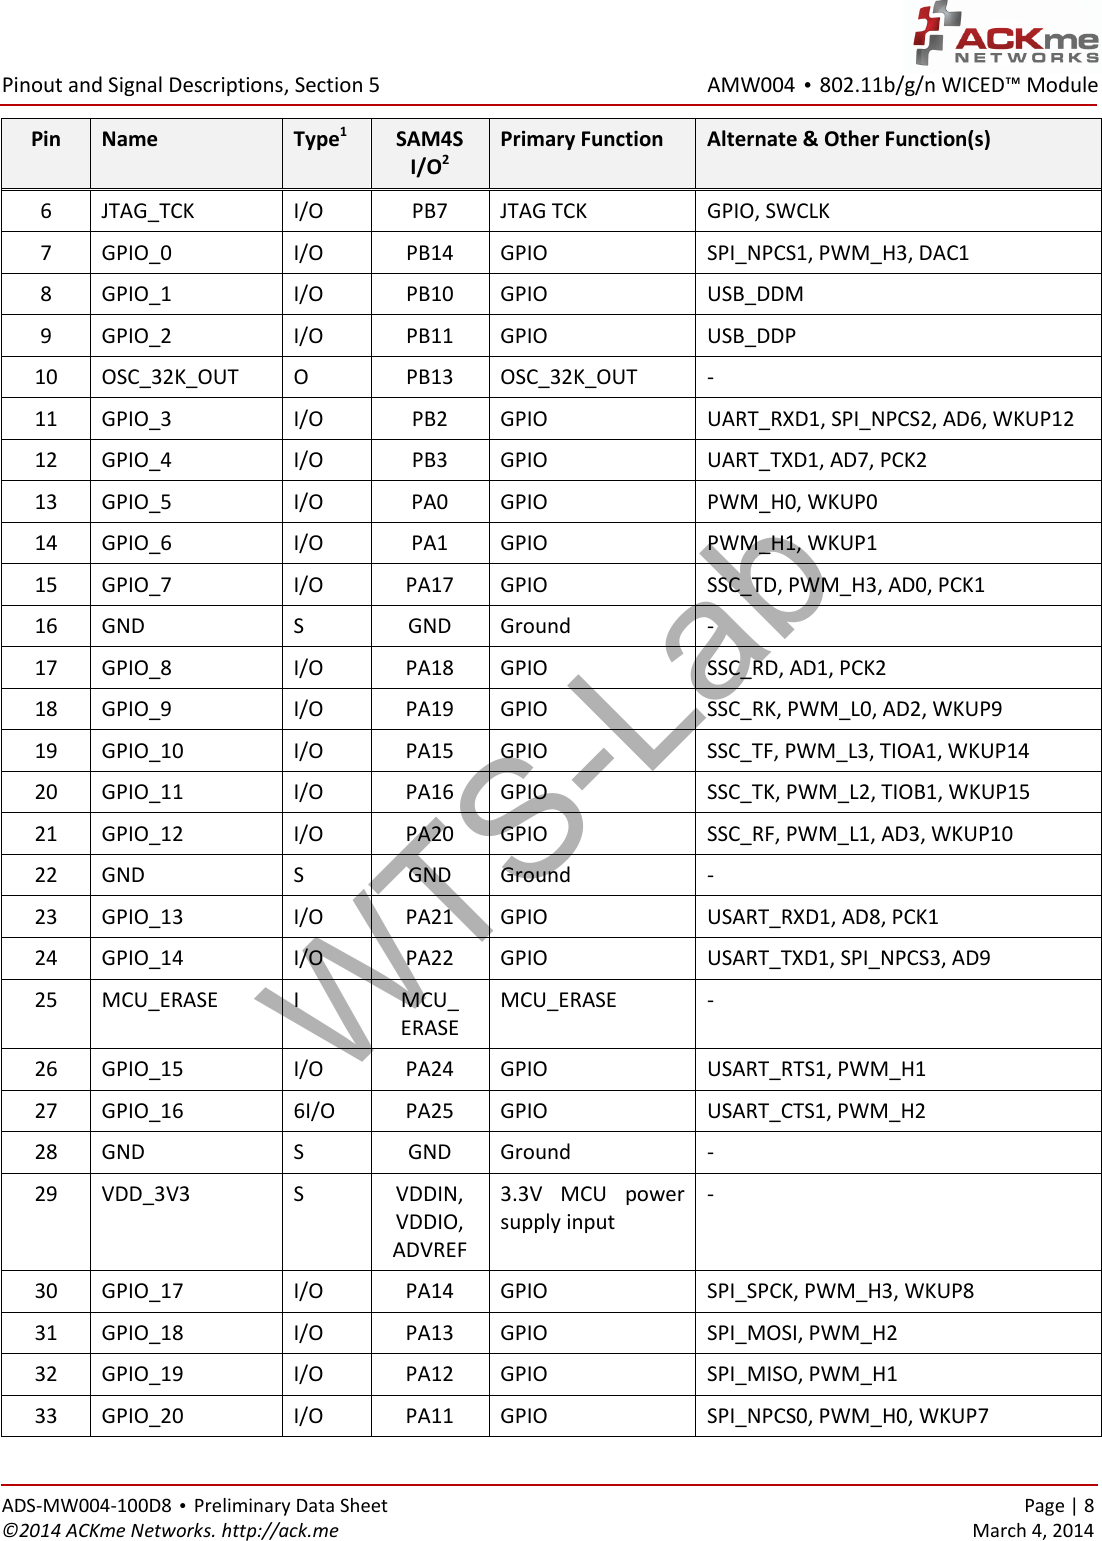 AMW004 • 802.11b/g/n WICED™ Module  Pinout and Signal Descriptions, Section 5 ADS-MW004-100D8 • Preliminary Data Sheet    Page | 8 ©2014 ACKme Networks. http://ack.me    March 4, 2014 Pin Name Type1 SAM4S I/O2 Primary Function  Alternate &amp; Other Function(s) 6 JTAG_TCK I/O PB7 JTAG TCK GPIO, SWCLK 7 GPIO_0 I/O PB14 GPIO SPI_NPCS1, PWM_H3, DAC1 8 GPIO_1 I/O PB10 GPIO USB_DDM 9 GPIO_2 I/O PB11 GPIO USB_DDP 10 OSC_32K_OUT O PB13 OSC_32K_OUT - 11 GPIO_3 I/O PB2 GPIO UART_RXD1, SPI_NPCS2, AD6, WKUP12 12 GPIO_4 I/O PB3 GPIO UART_TXD1, AD7, PCK2 13 GPIO_5 I/O PA0 GPIO PWM_H0, WKUP0 14 GPIO_6 I/O PA1 GPIO PWM_H1, WKUP1 15 GPIO_7 I/O PA17 GPIO SSC_TD, PWM_H3, AD0, PCK1 16 GND S GND Ground - 17 GPIO_8 I/O PA18 GPIO SSC_RD, AD1, PCK2  18 GPIO_9 I/O PA19 GPIO SSC_RK, PWM_L0, AD2, WKUP9 19 GPIO_10 I/O PA15 GPIO SSC_TF, PWM_L3, TIOA1, WKUP14 20 GPIO_11 I/O PA16 GPIO SSC_TK, PWM_L2, TIOB1, WKUP15 21 GPIO_12 I/O PA20 GPIO SSC_RF, PWM_L1, AD3, WKUP10 22 GND S GND Ground - 23 GPIO_13 I/O PA21 GPIO USART_RXD1, AD8, PCK1 24 GPIO_14 I/O PA22 GPIO USART_TXD1, SPI_NPCS3, AD9 25 MCU_ERASE I MCU_ ERASE MCU_ERASE - 26 GPIO_15 I/O PA24 GPIO USART_RTS1, PWM_H1 27 GPIO_16 6I/O PA25 GPIO USART_CTS1, PWM_H2 28 GND S GND Ground - 29 VDD_3V3 S VDDIN, VDDIO, ADVREF 3.3V  MCU  power supply input - 30 GPIO_17 I/O PA14 GPIO SPI_SPCK, PWM_H3, WKUP8 31 GPIO_18 I/O PA13 GPIO SPI_MOSI, PWM_H2 32 GPIO_19 I/O PA12 GPIO SPI_MISO, PWM_H1 33 GPIO_20 I/O PA11 GPIO SPI_NPCS0, PWM_H0, WKUP7 WTS-Lab